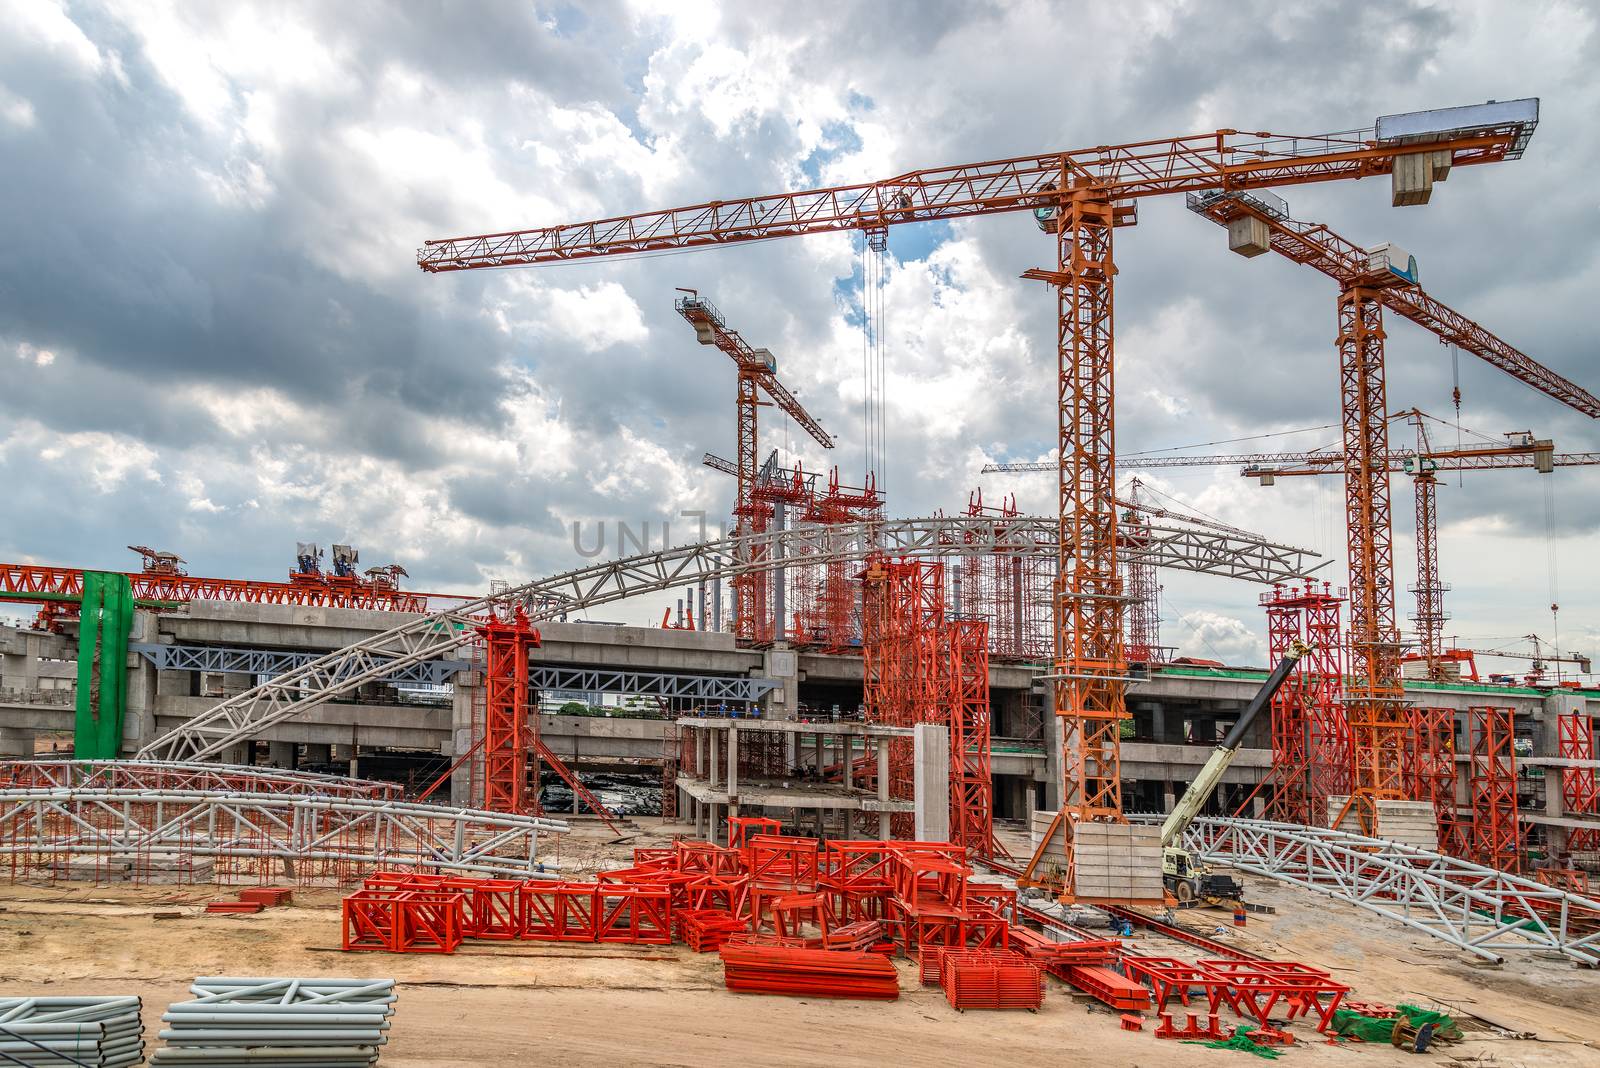 Cranes Working on Expressway Construction Sites in Asia